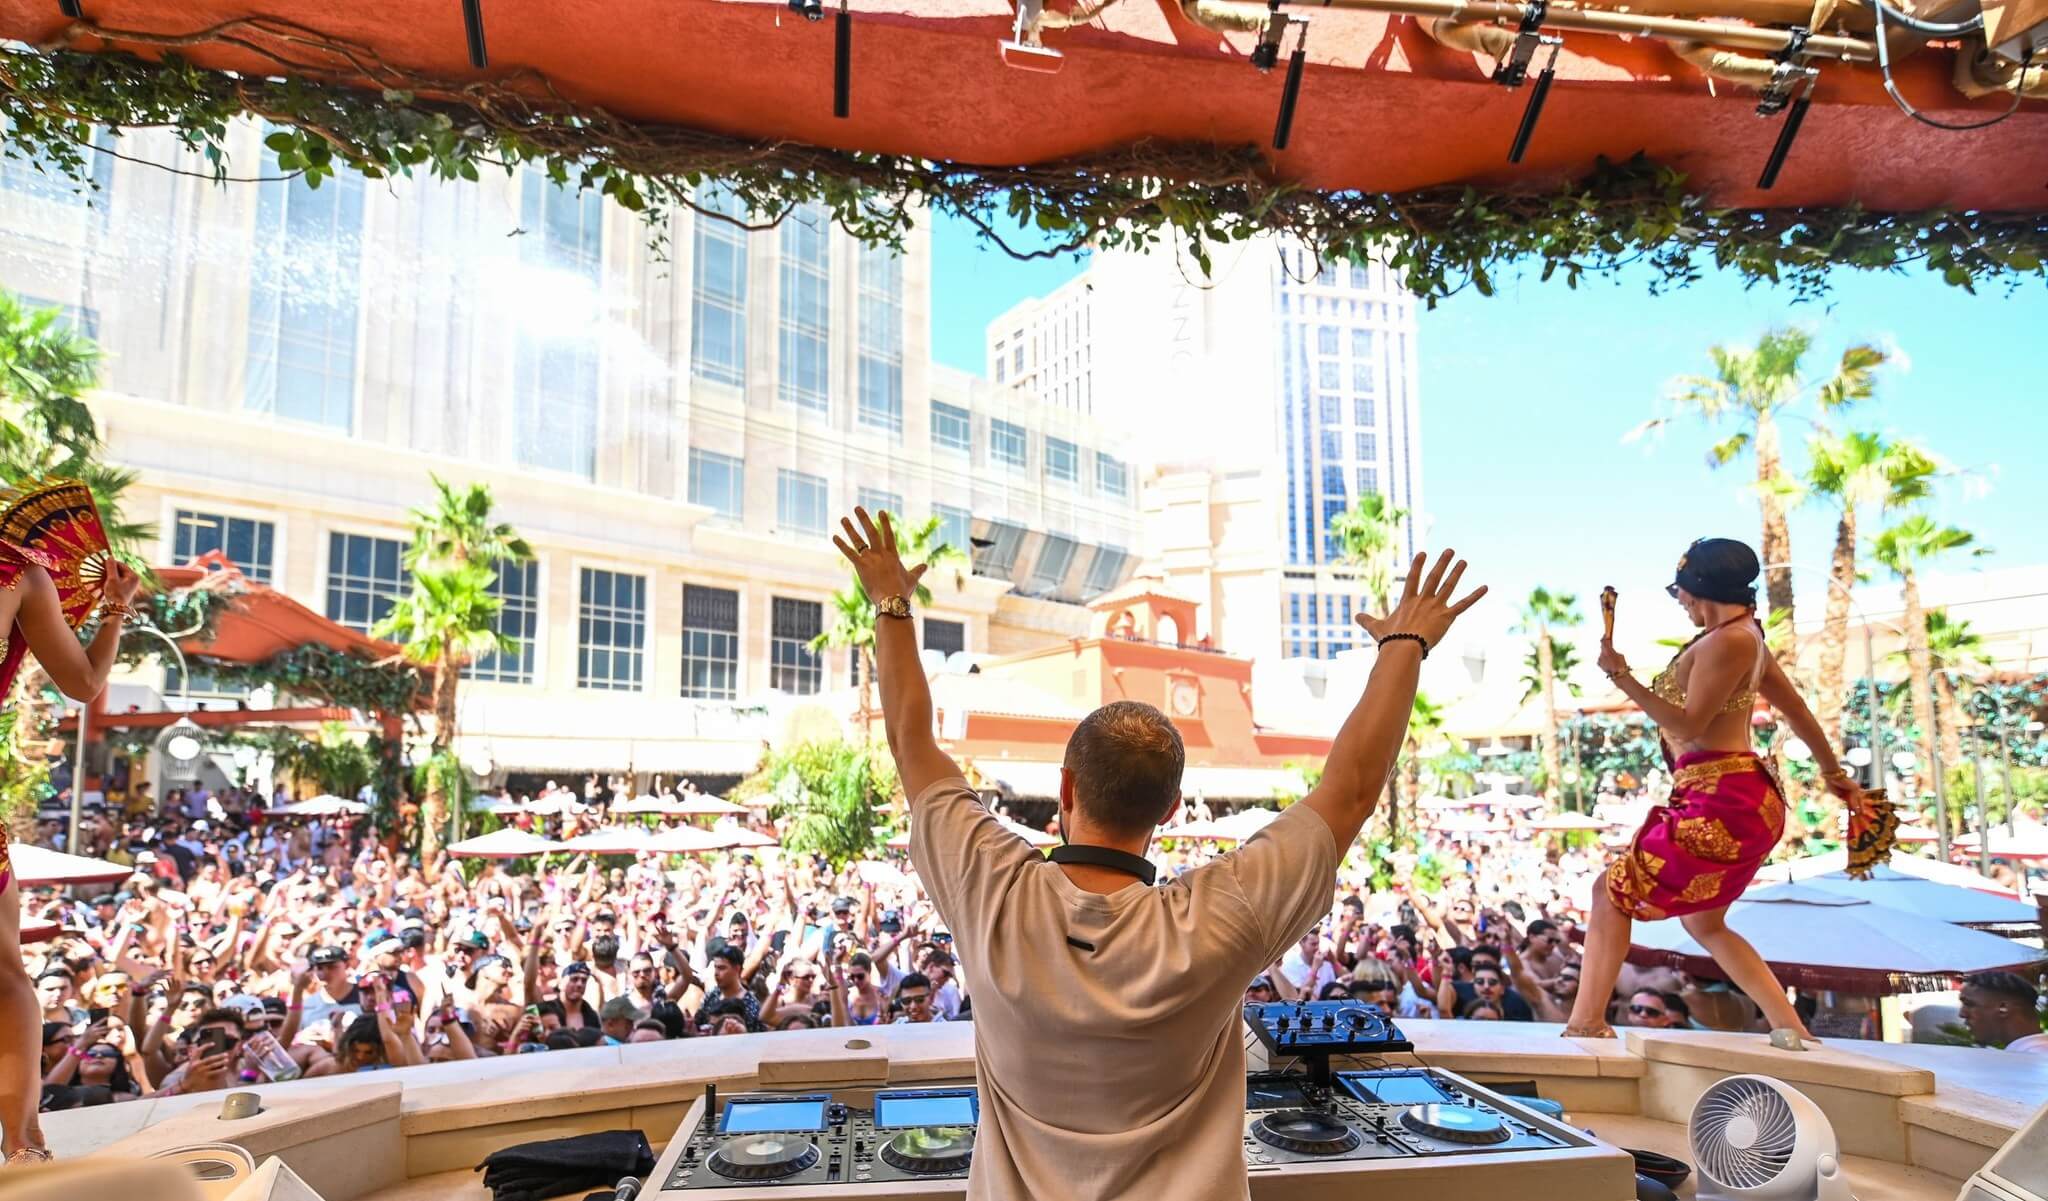 DJ raises arms to rally crowd at pool party